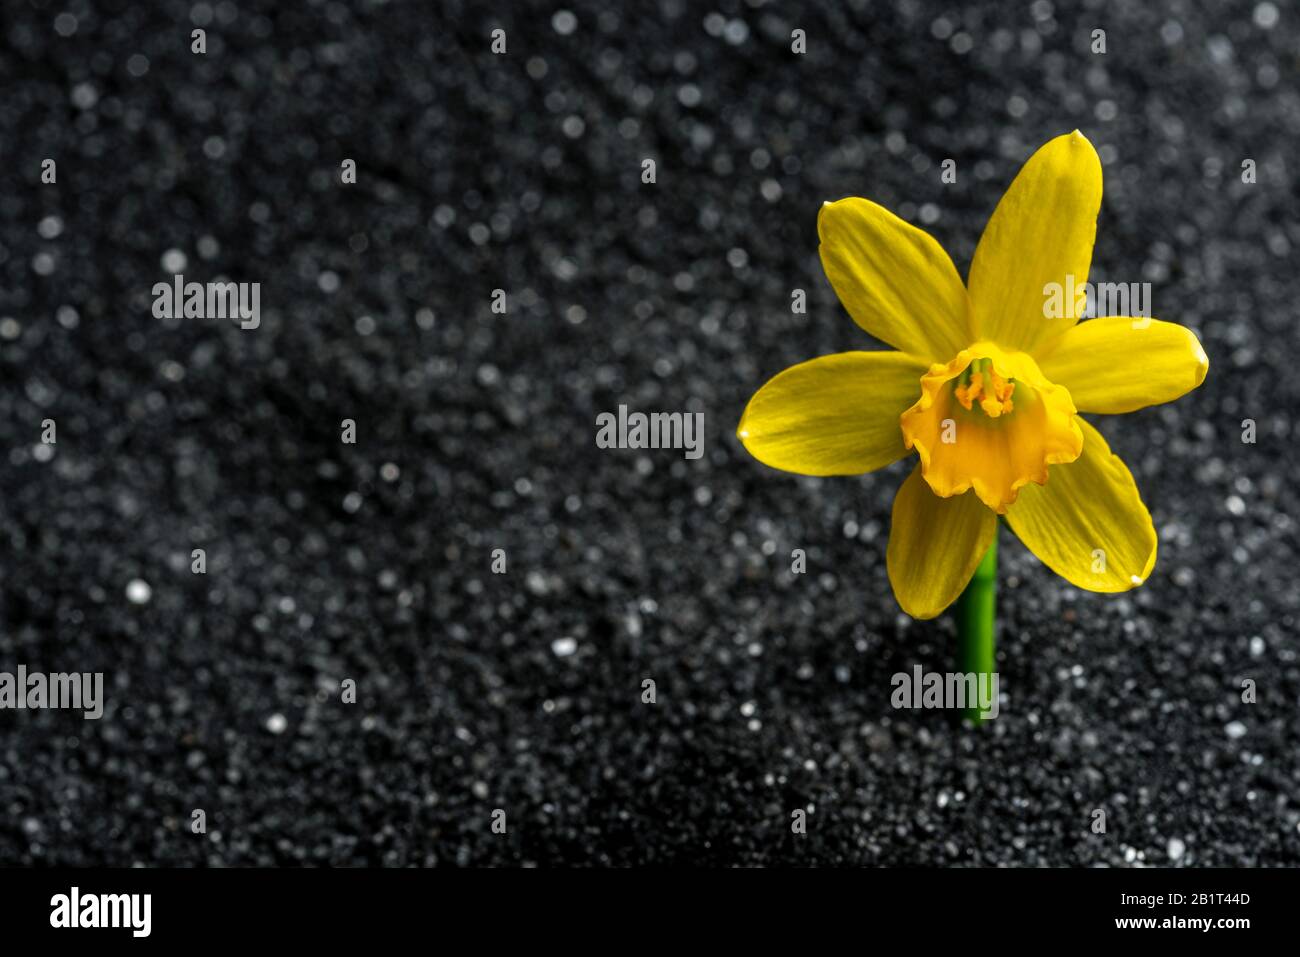 Daffodil, tete tete, growing in black sand defying all odds to survive in adverse conditions. Stock Photo